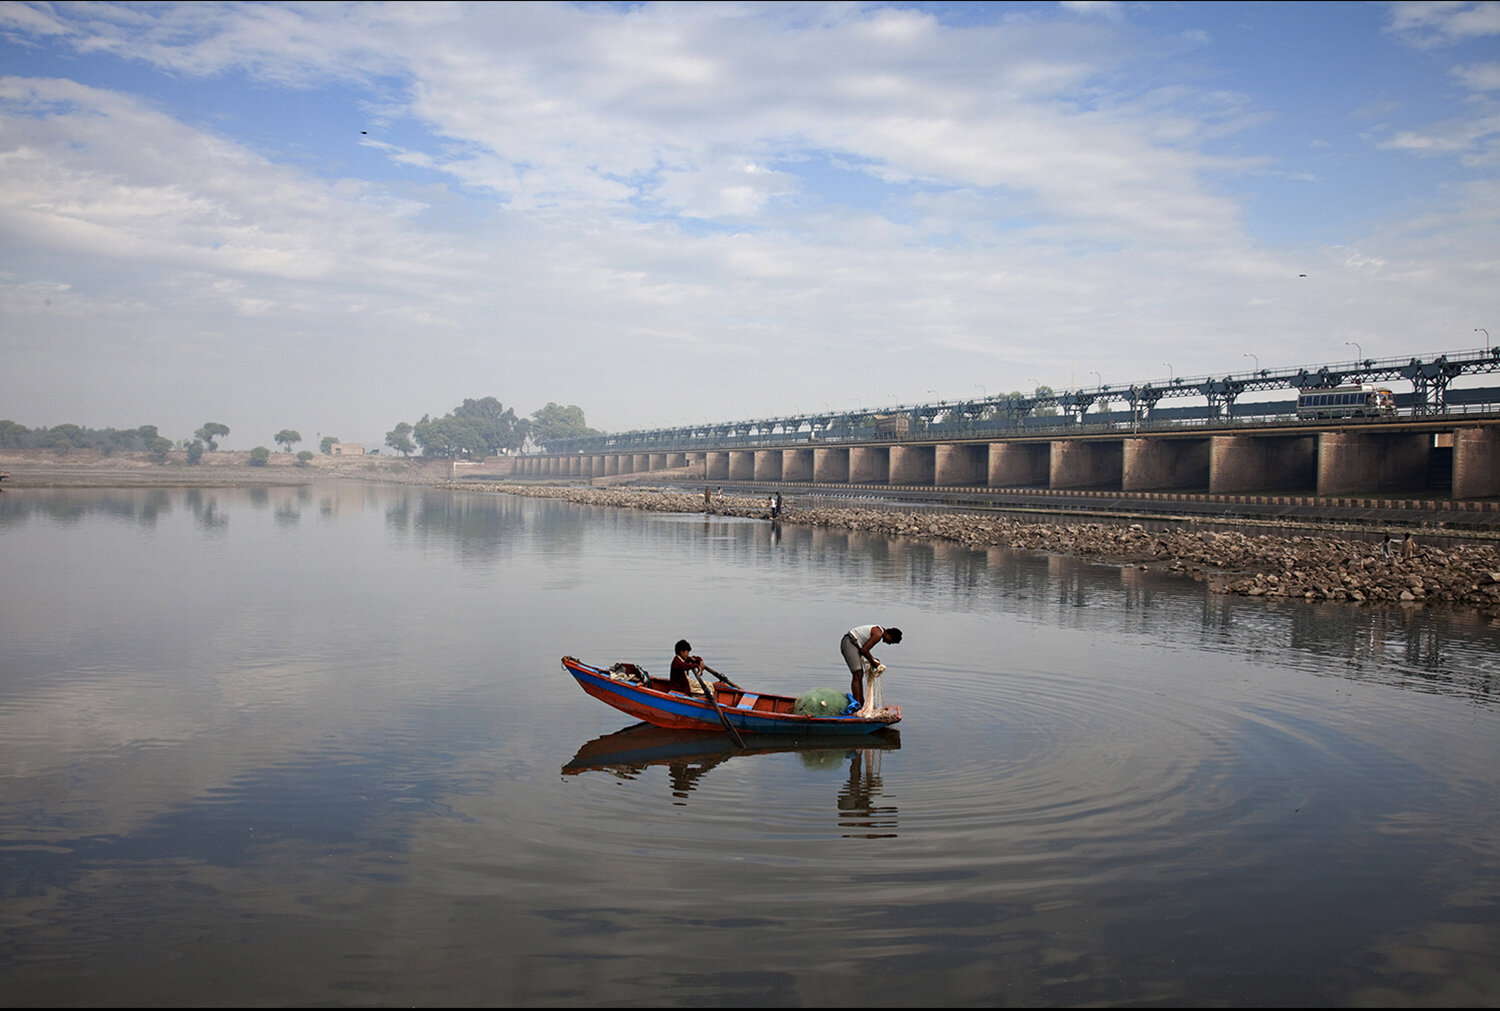  Scene along the Balloki Headworks that is part of the British built canal system in the Punjab, Pakistan. 2009 